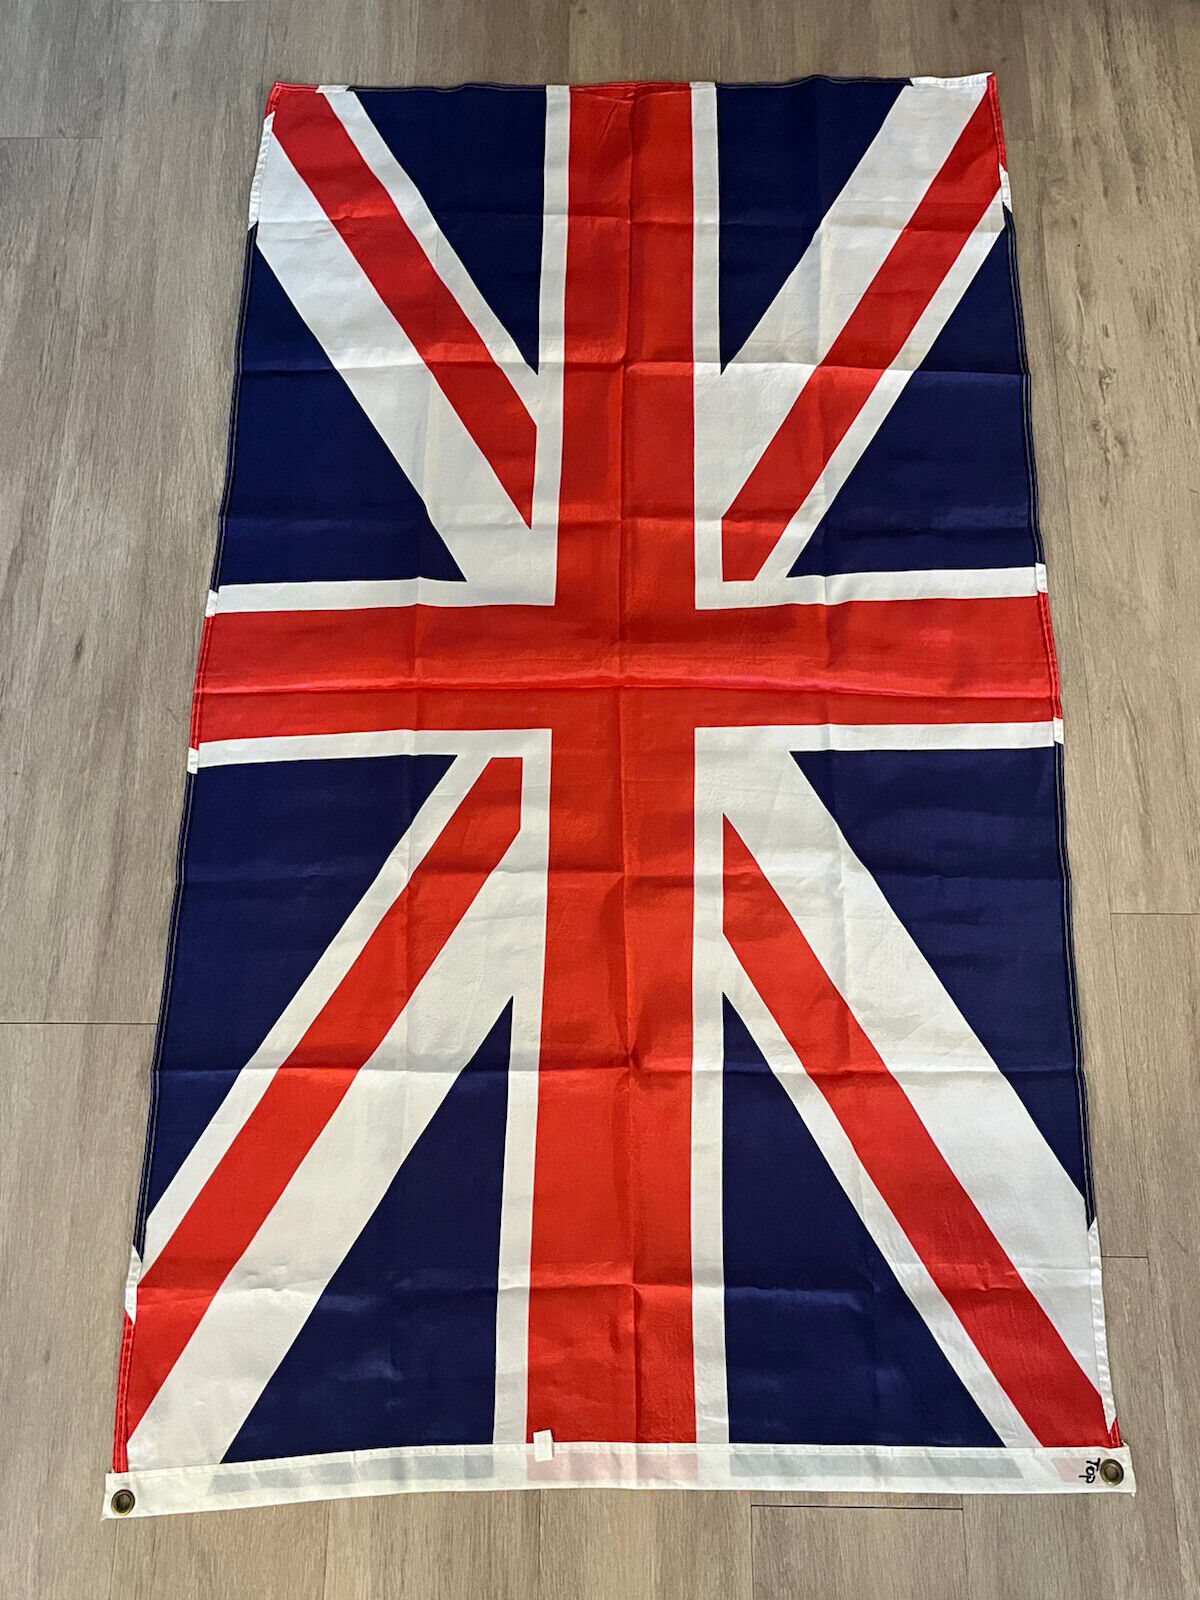 3'x5' King's Colors British Flag Outdoor UK Union Jack United Kingdom Queen 3x5